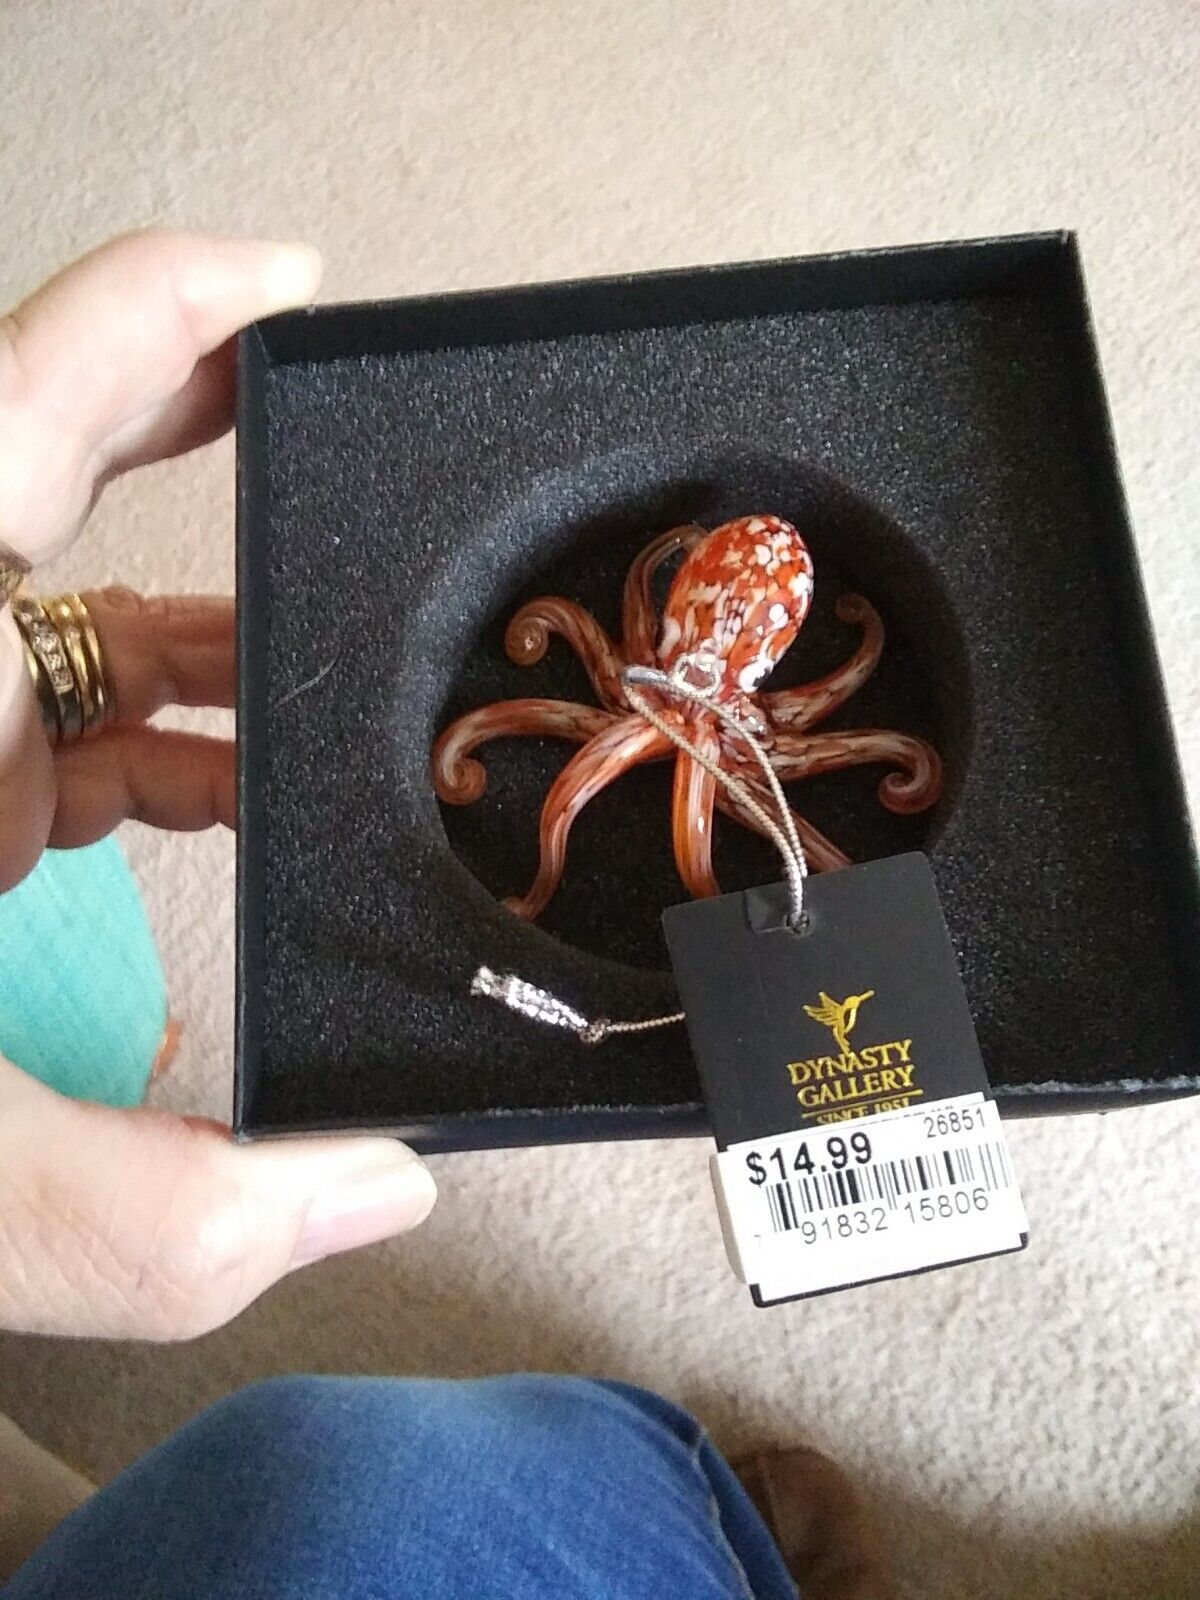 Octopus Glass Ornament By Dynasty Gallery New In Original Box Hand Made